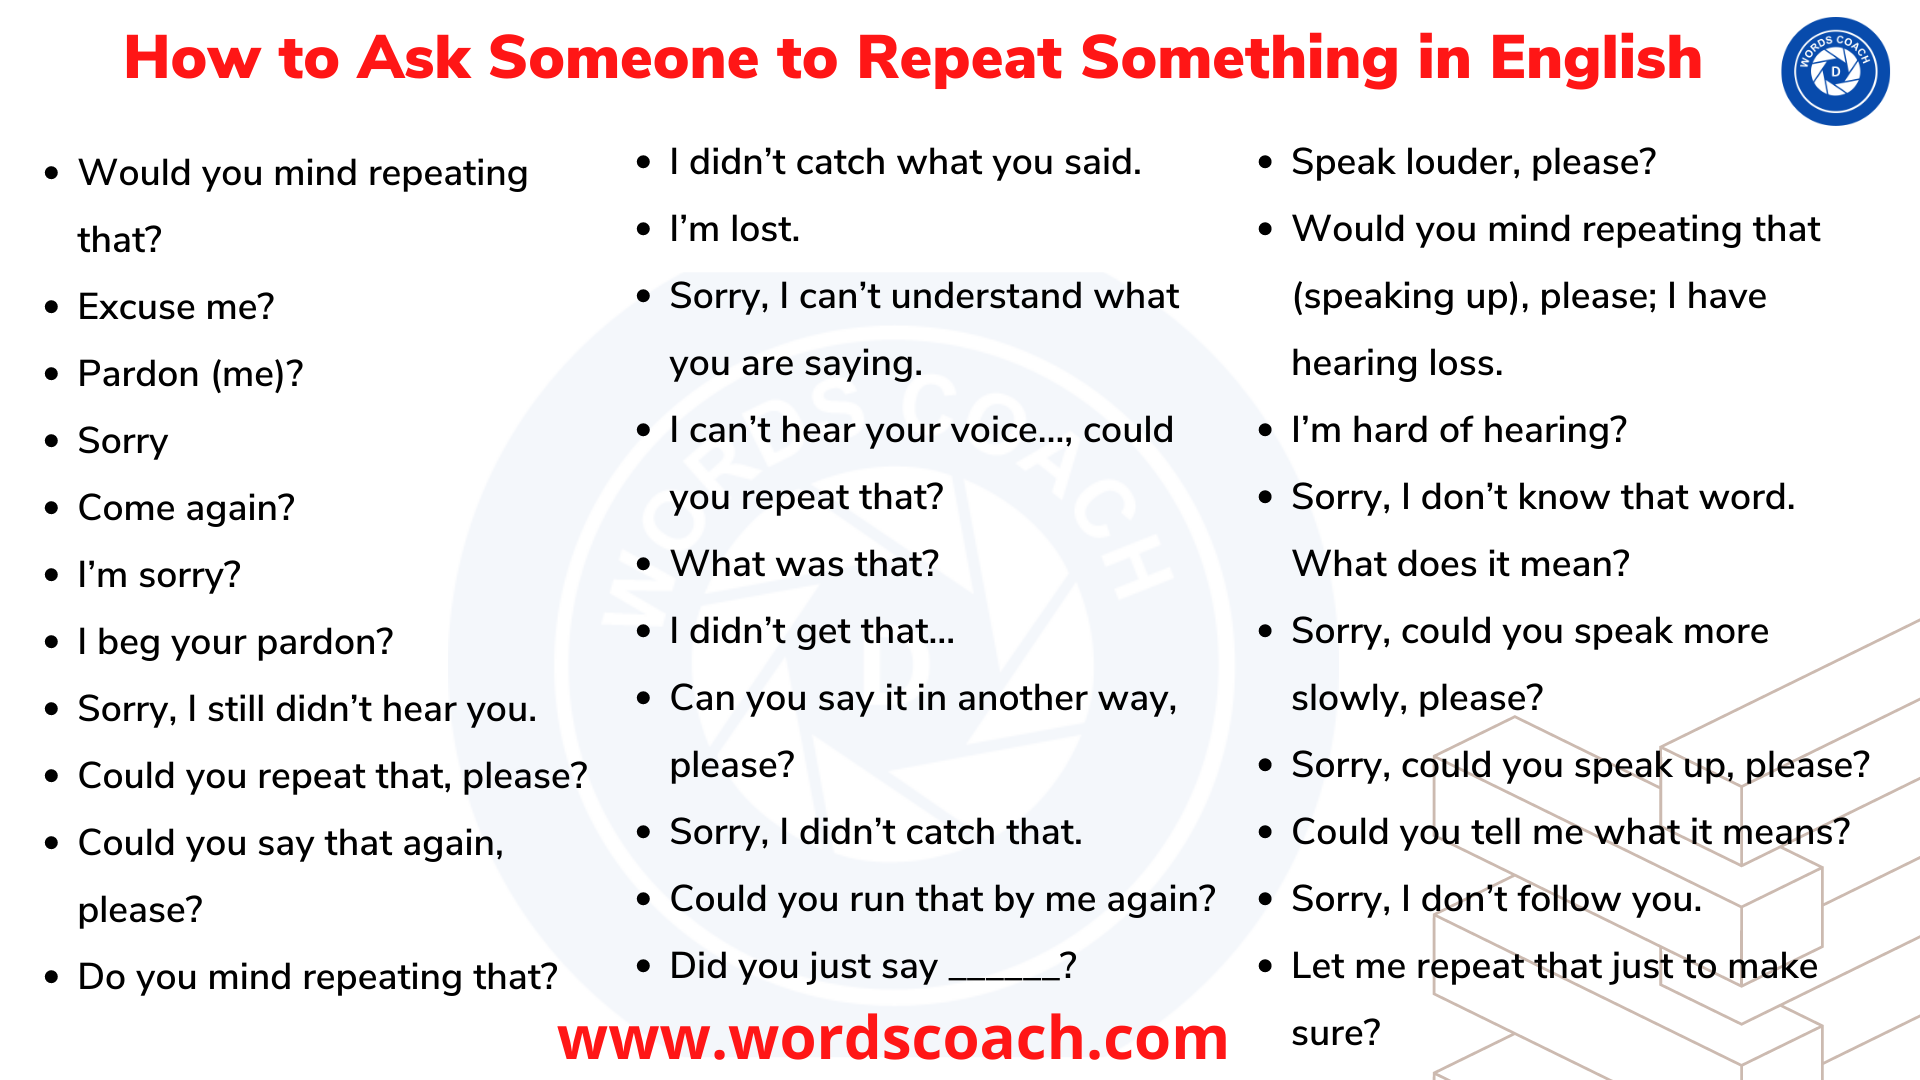 How to Ask Someone to Repeat Something in English - wordscoach.com